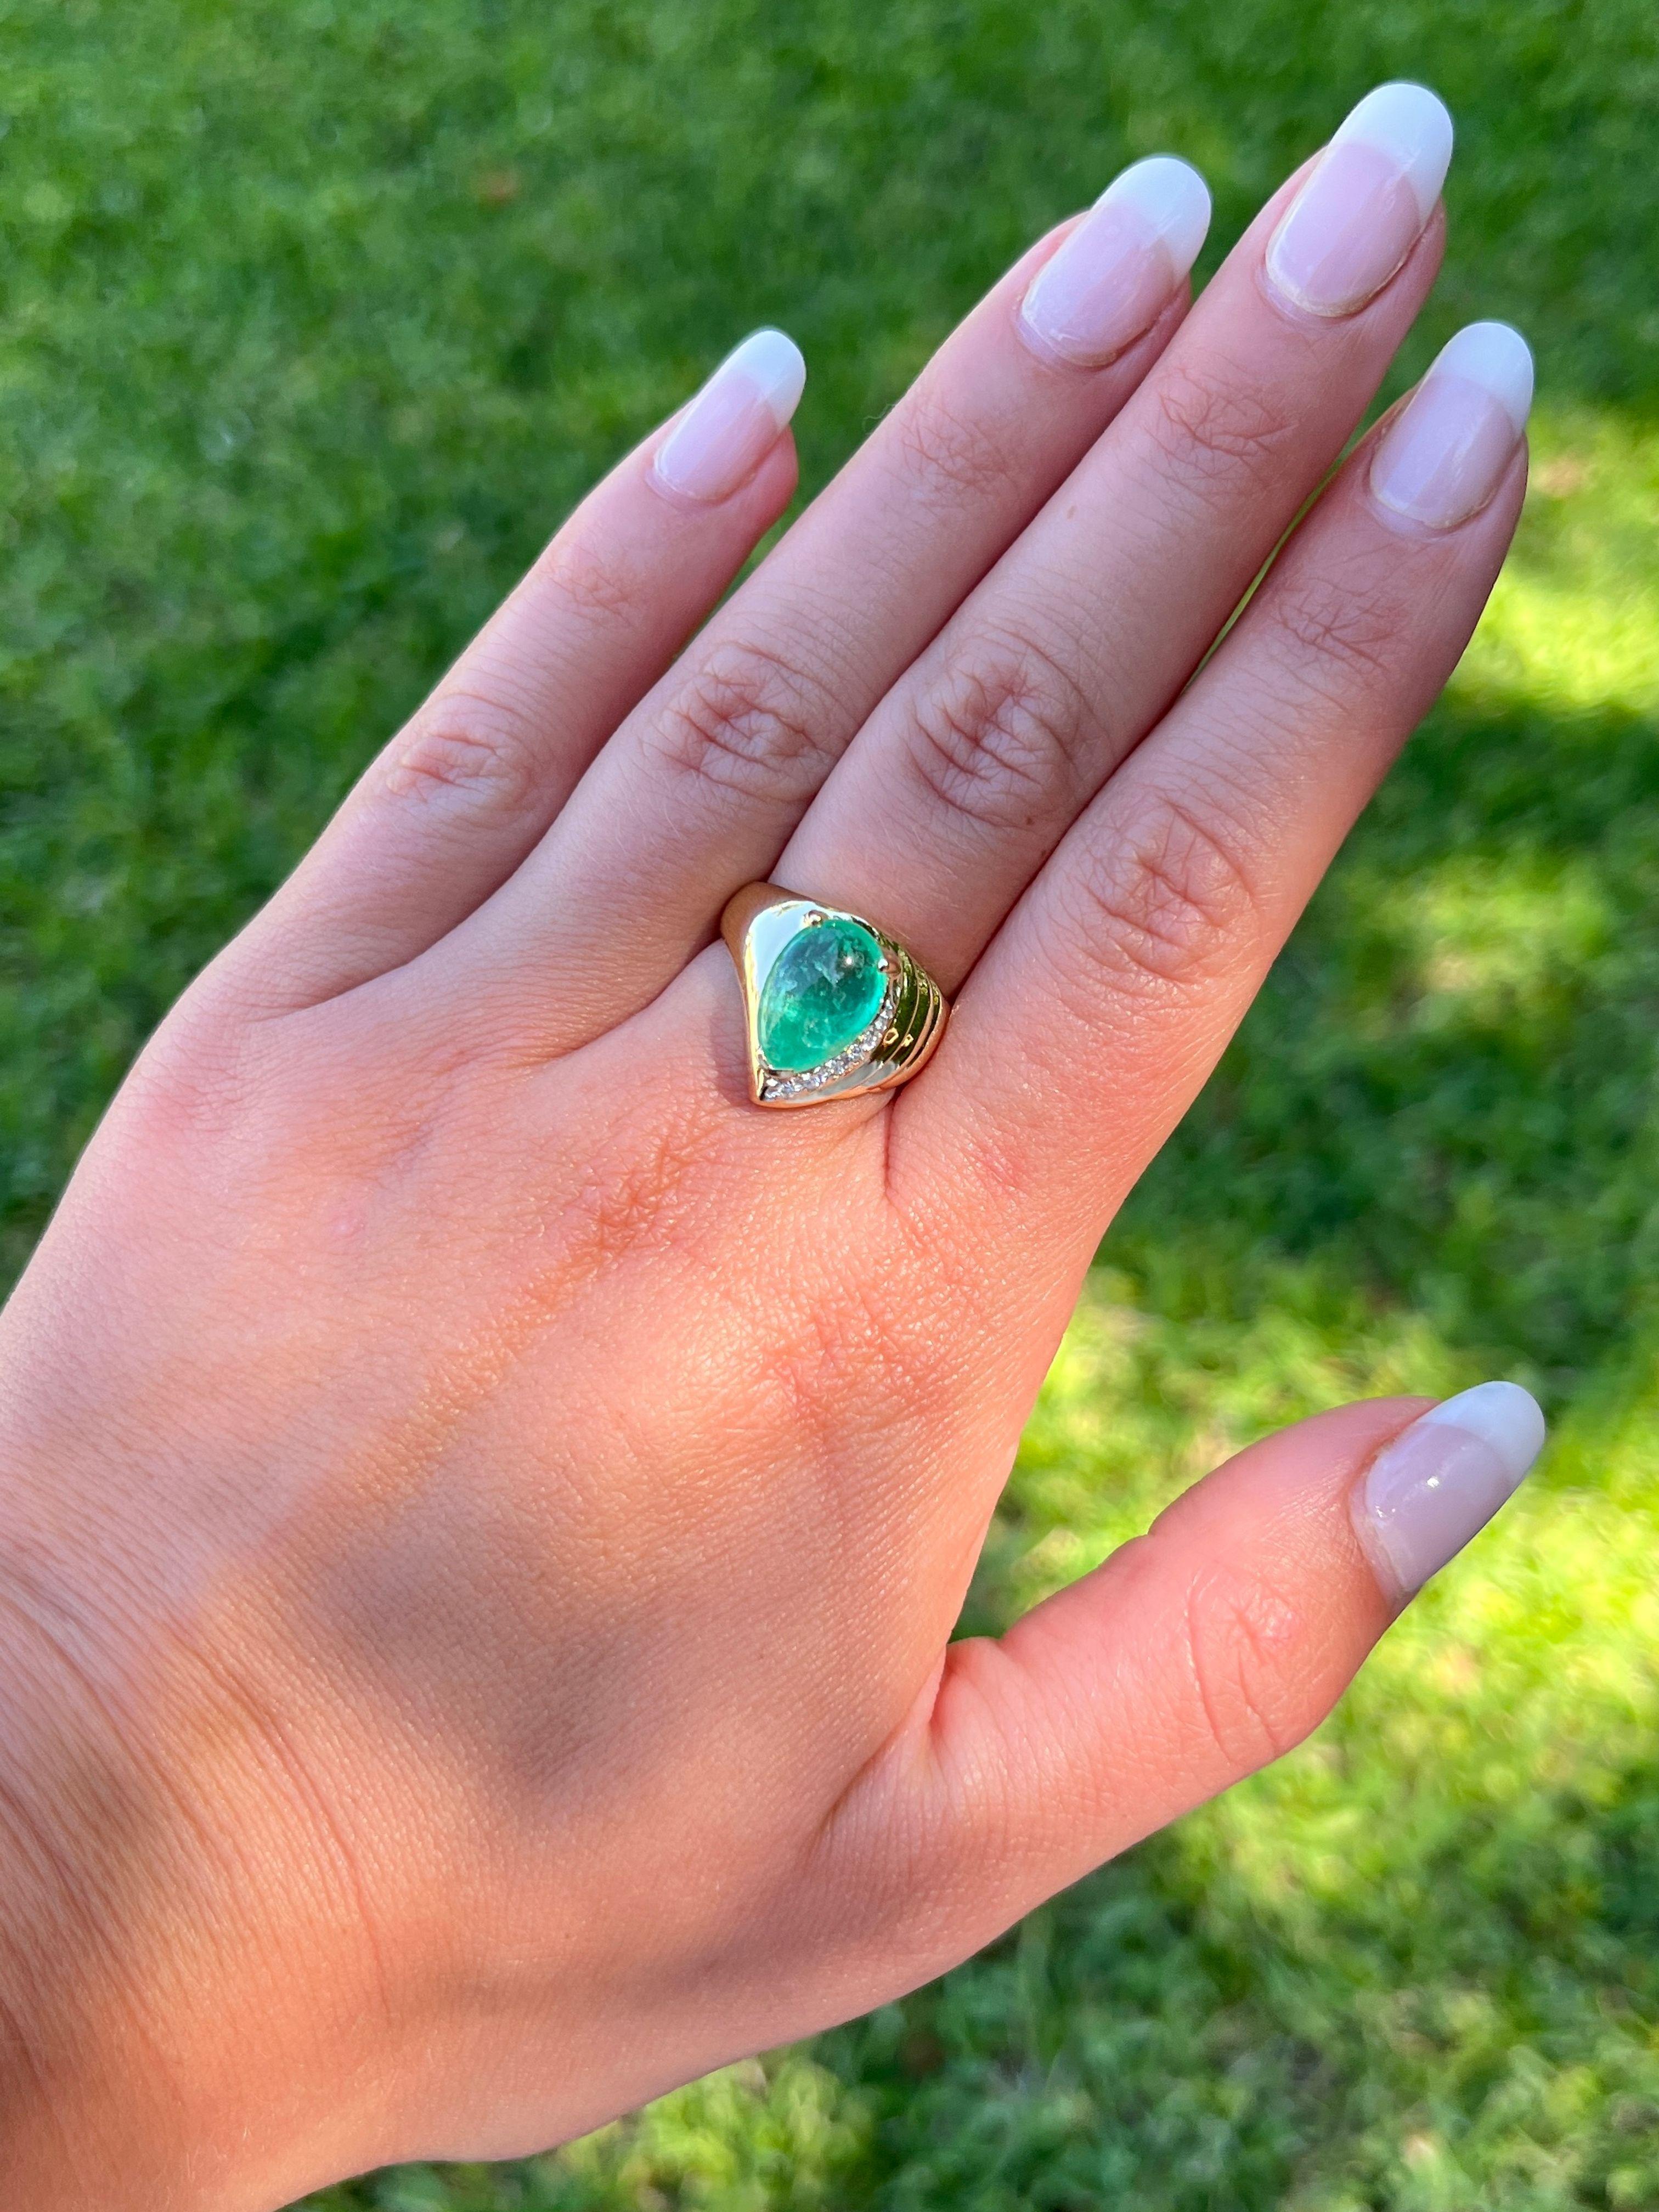 7.81 Carat Pear Shaped Cabochon Emerald Ring with Round Diamonds in 18K Gold For Sale 2